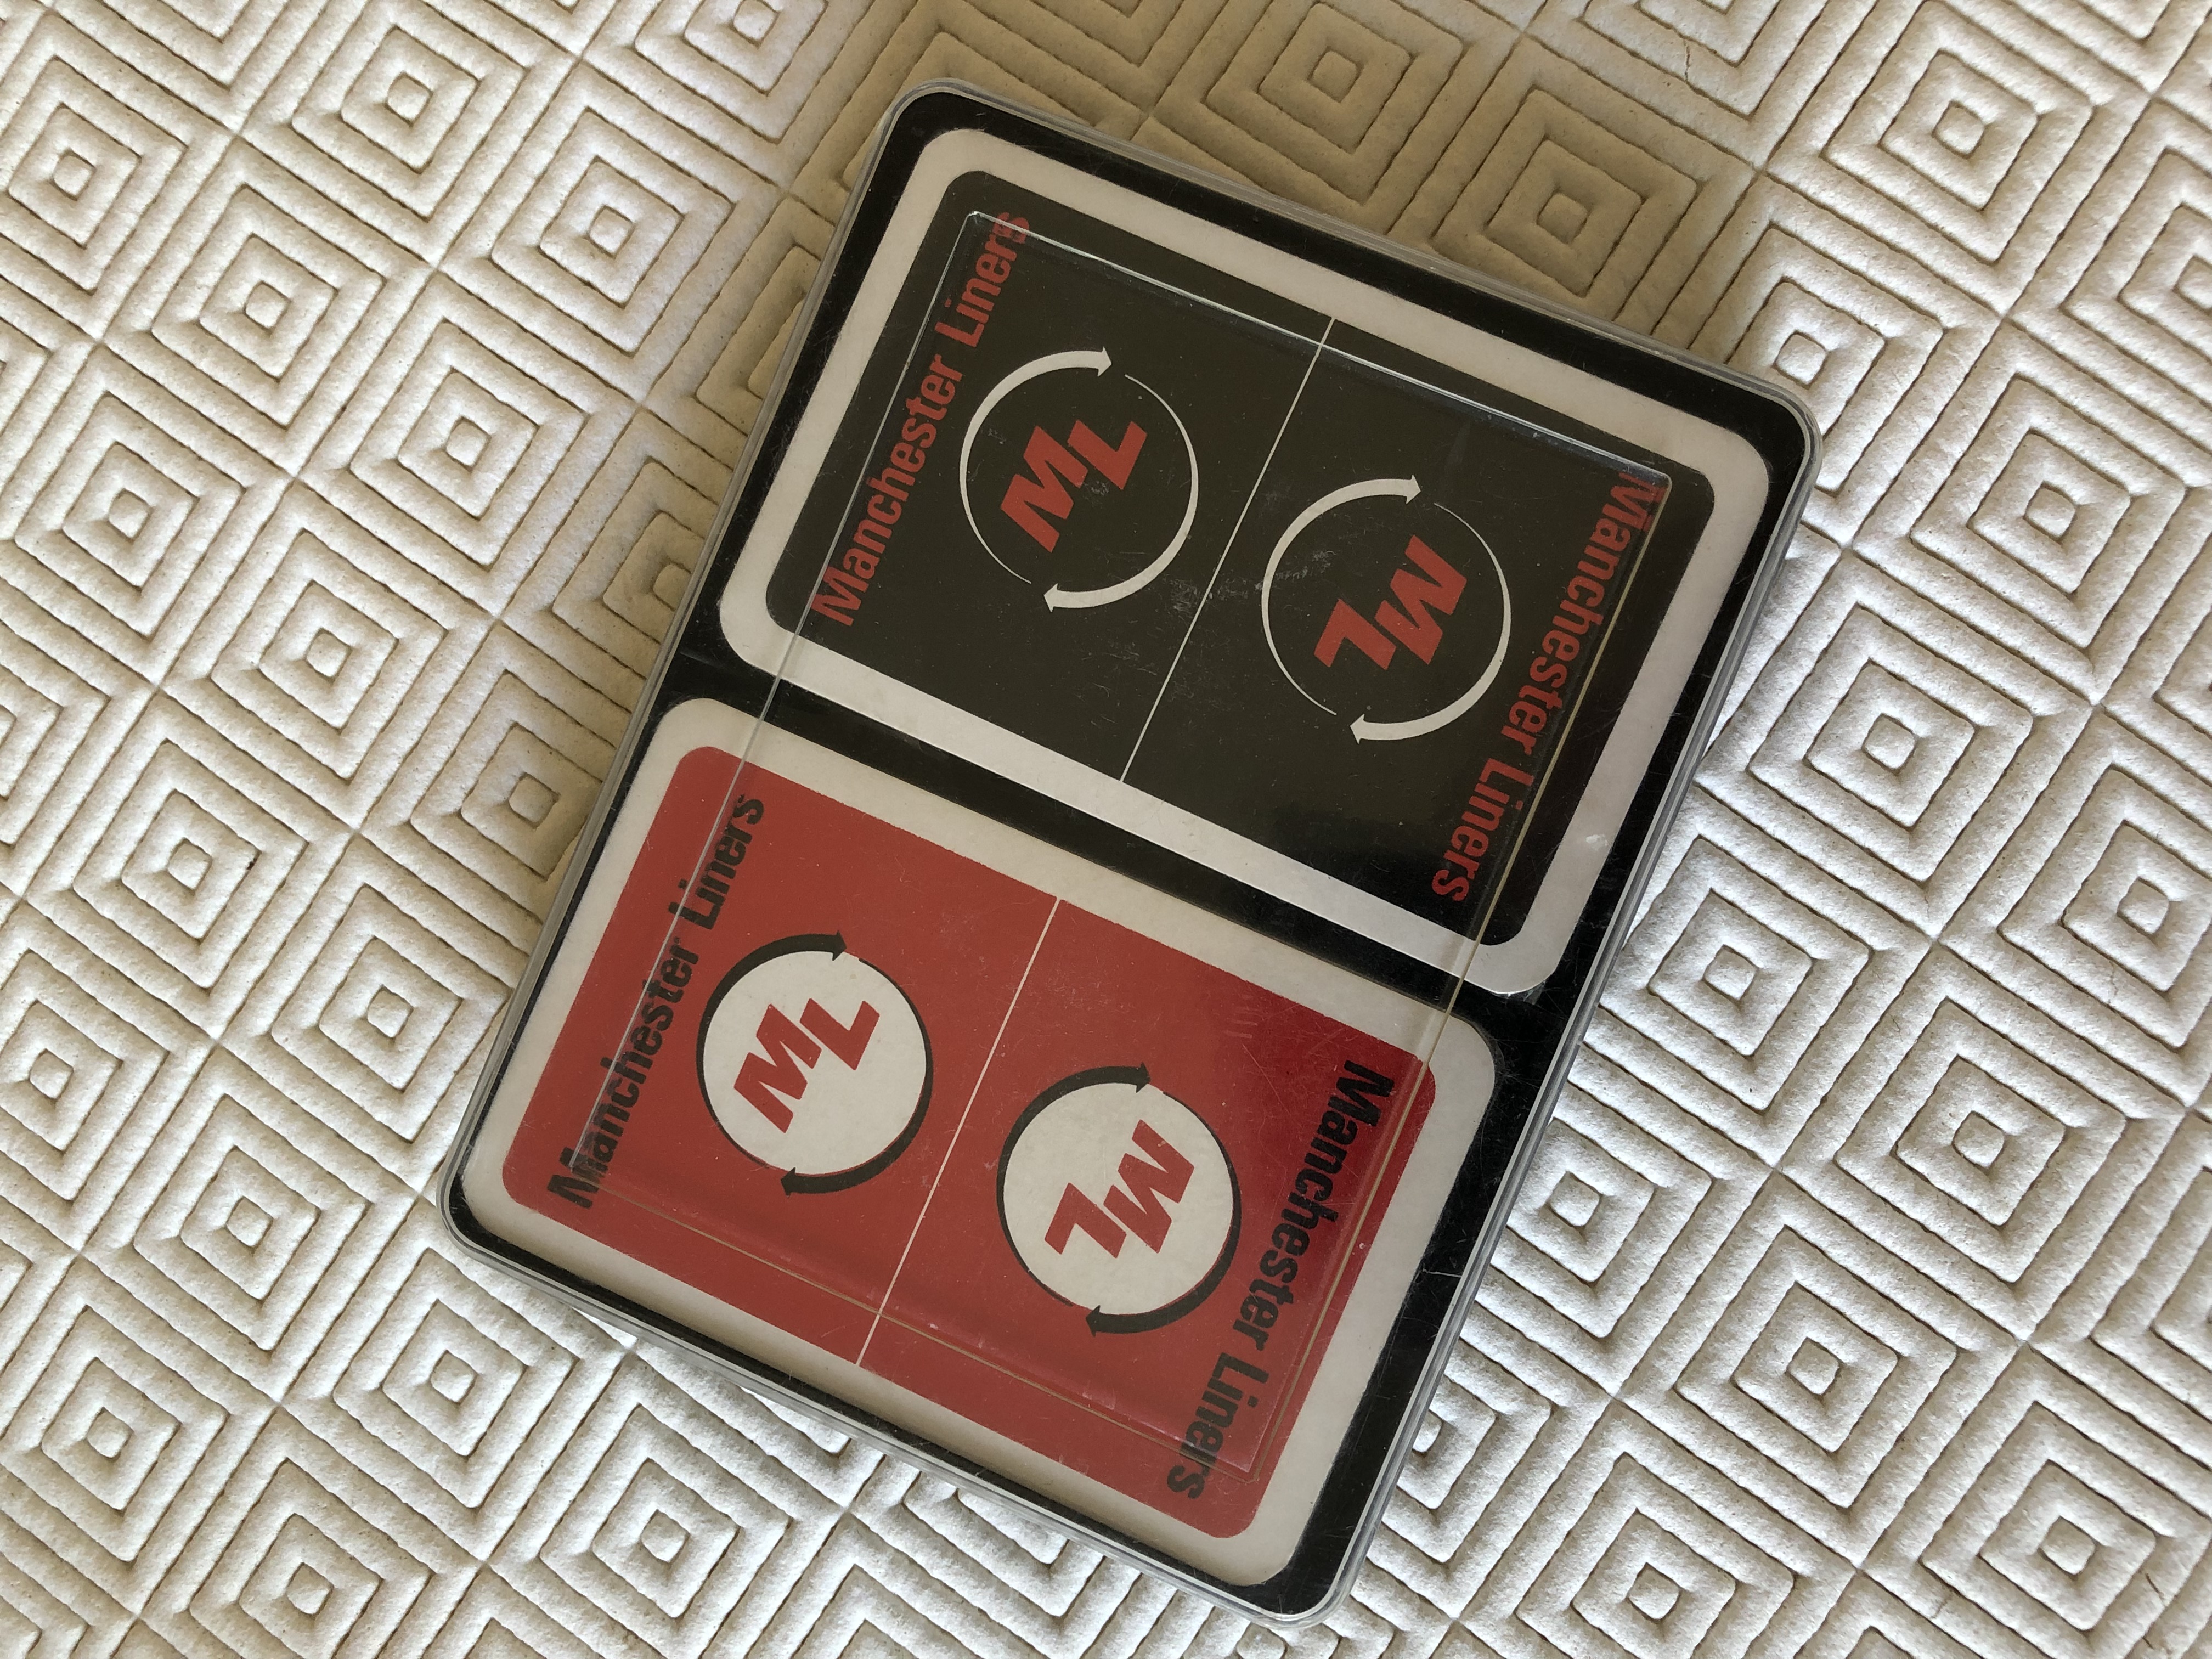 DOUBLE SET OF SOUVENIR PLAYING CARDS FROM THE MANCHESTER LINERS SHIPPING COMPANY CIRCA 1960's